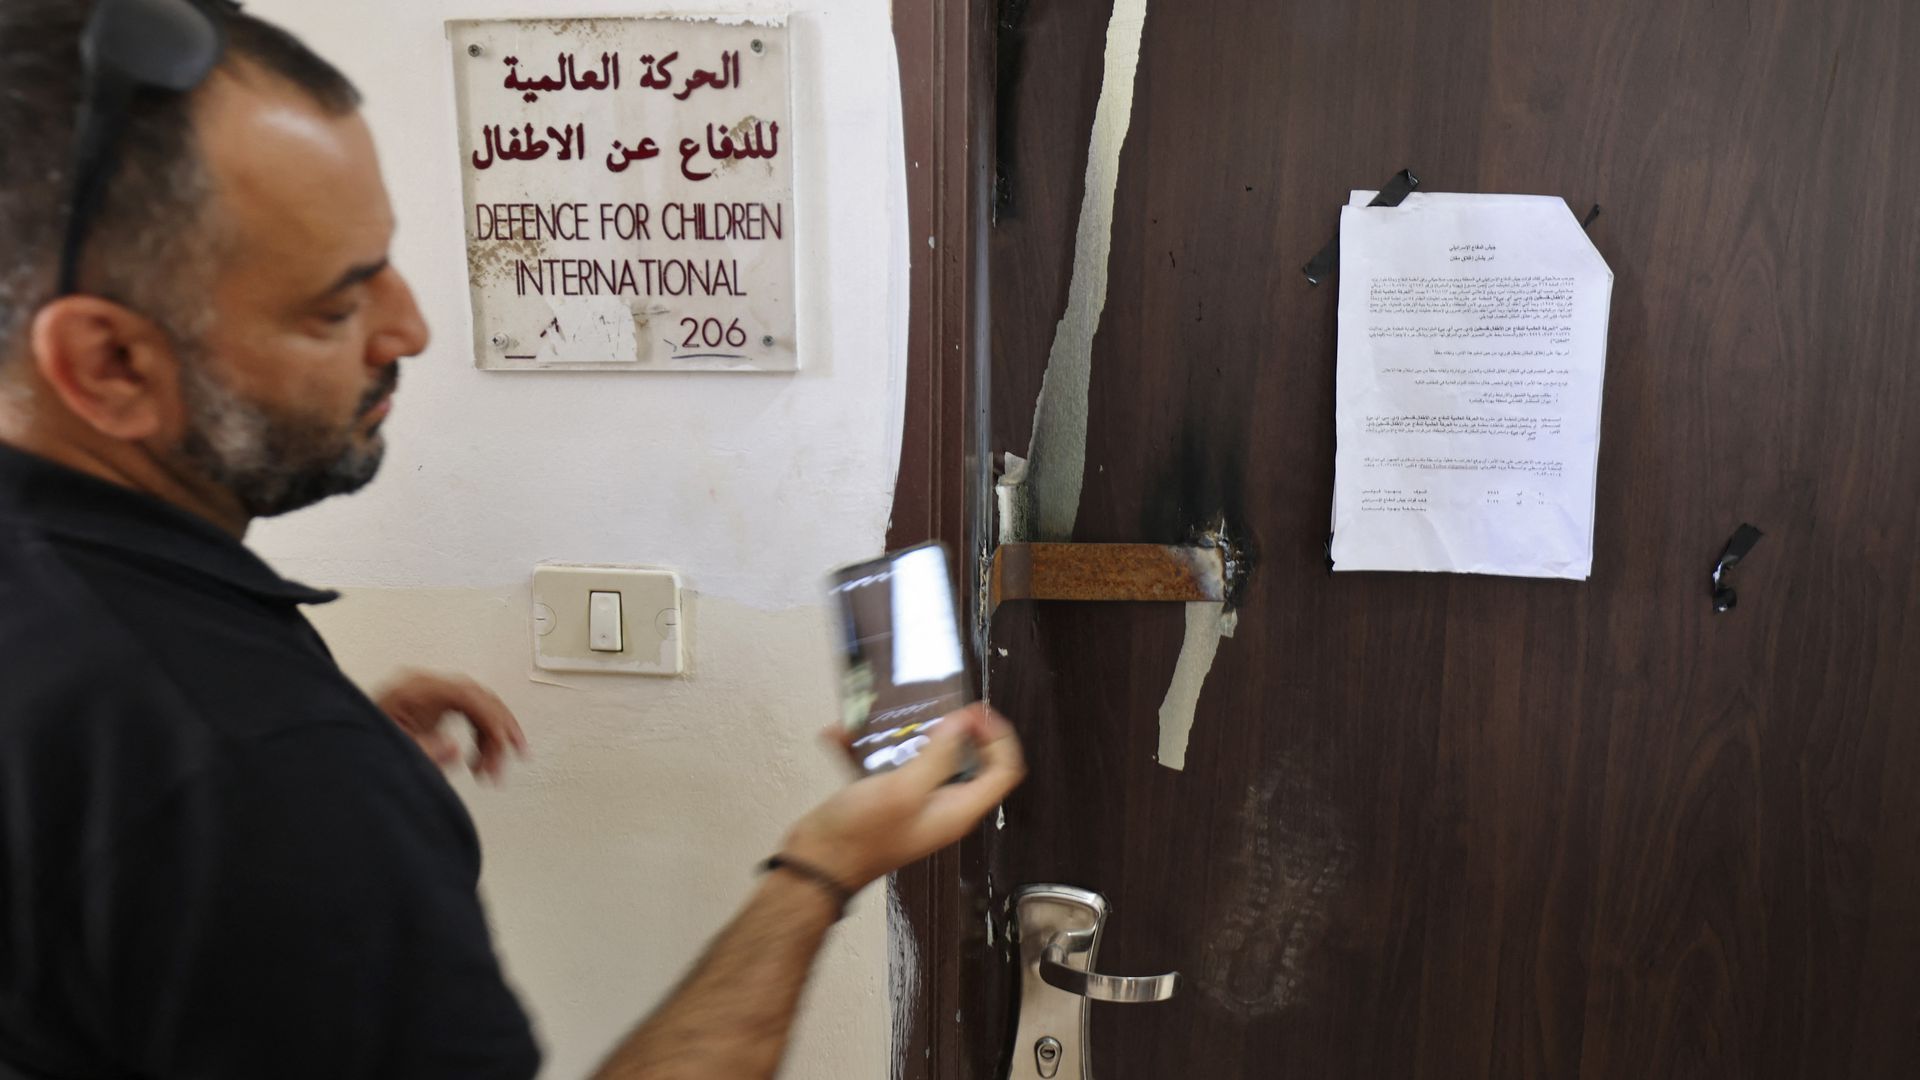 The door of Palestinian NGO Defence for Children International after it was raided by Israeli forces in the West Bank city of Ramallah in August. Photo: Abbas Momani/AFP via Getty Images